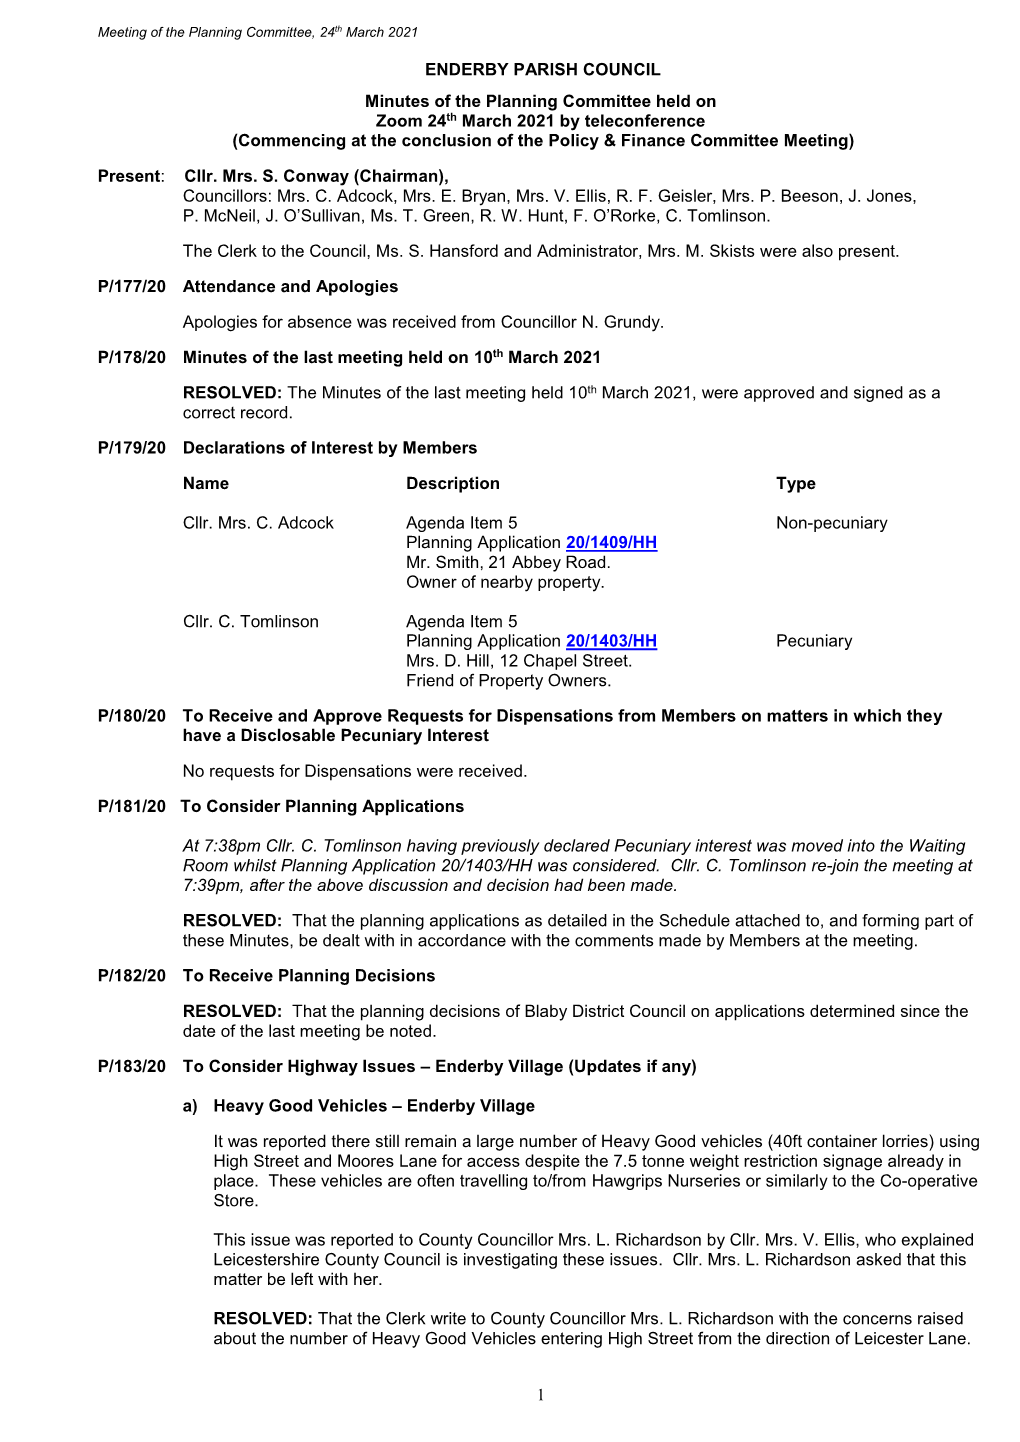 Planning Committee Minutes, 2021-03-24